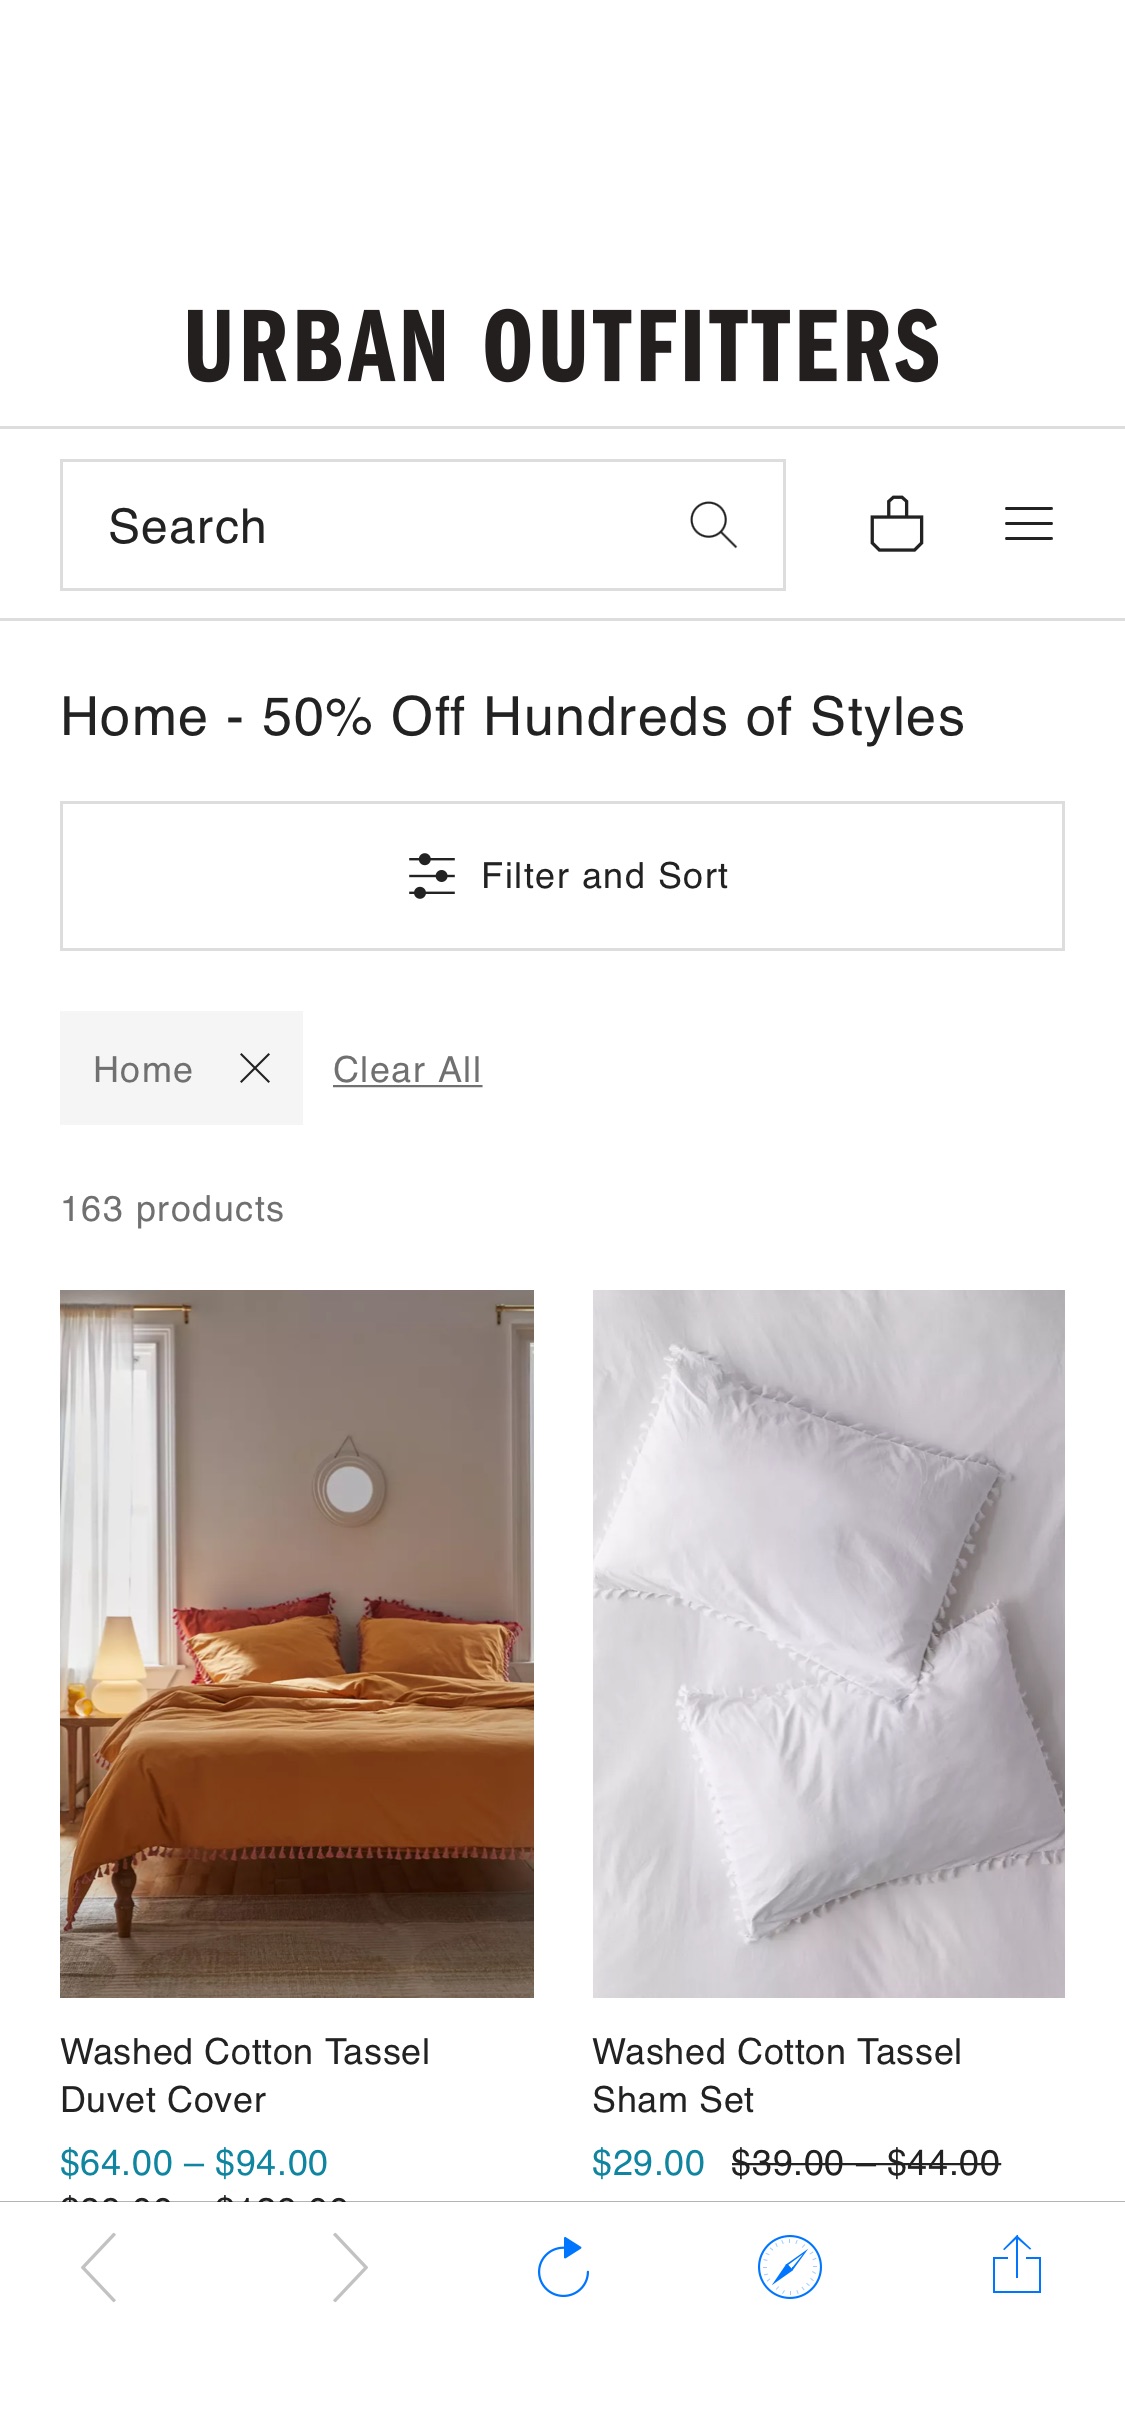 Home - 50% Off Hundreds of Styles | Urban Outfitters Sale家居专场 | Urban Outfitters